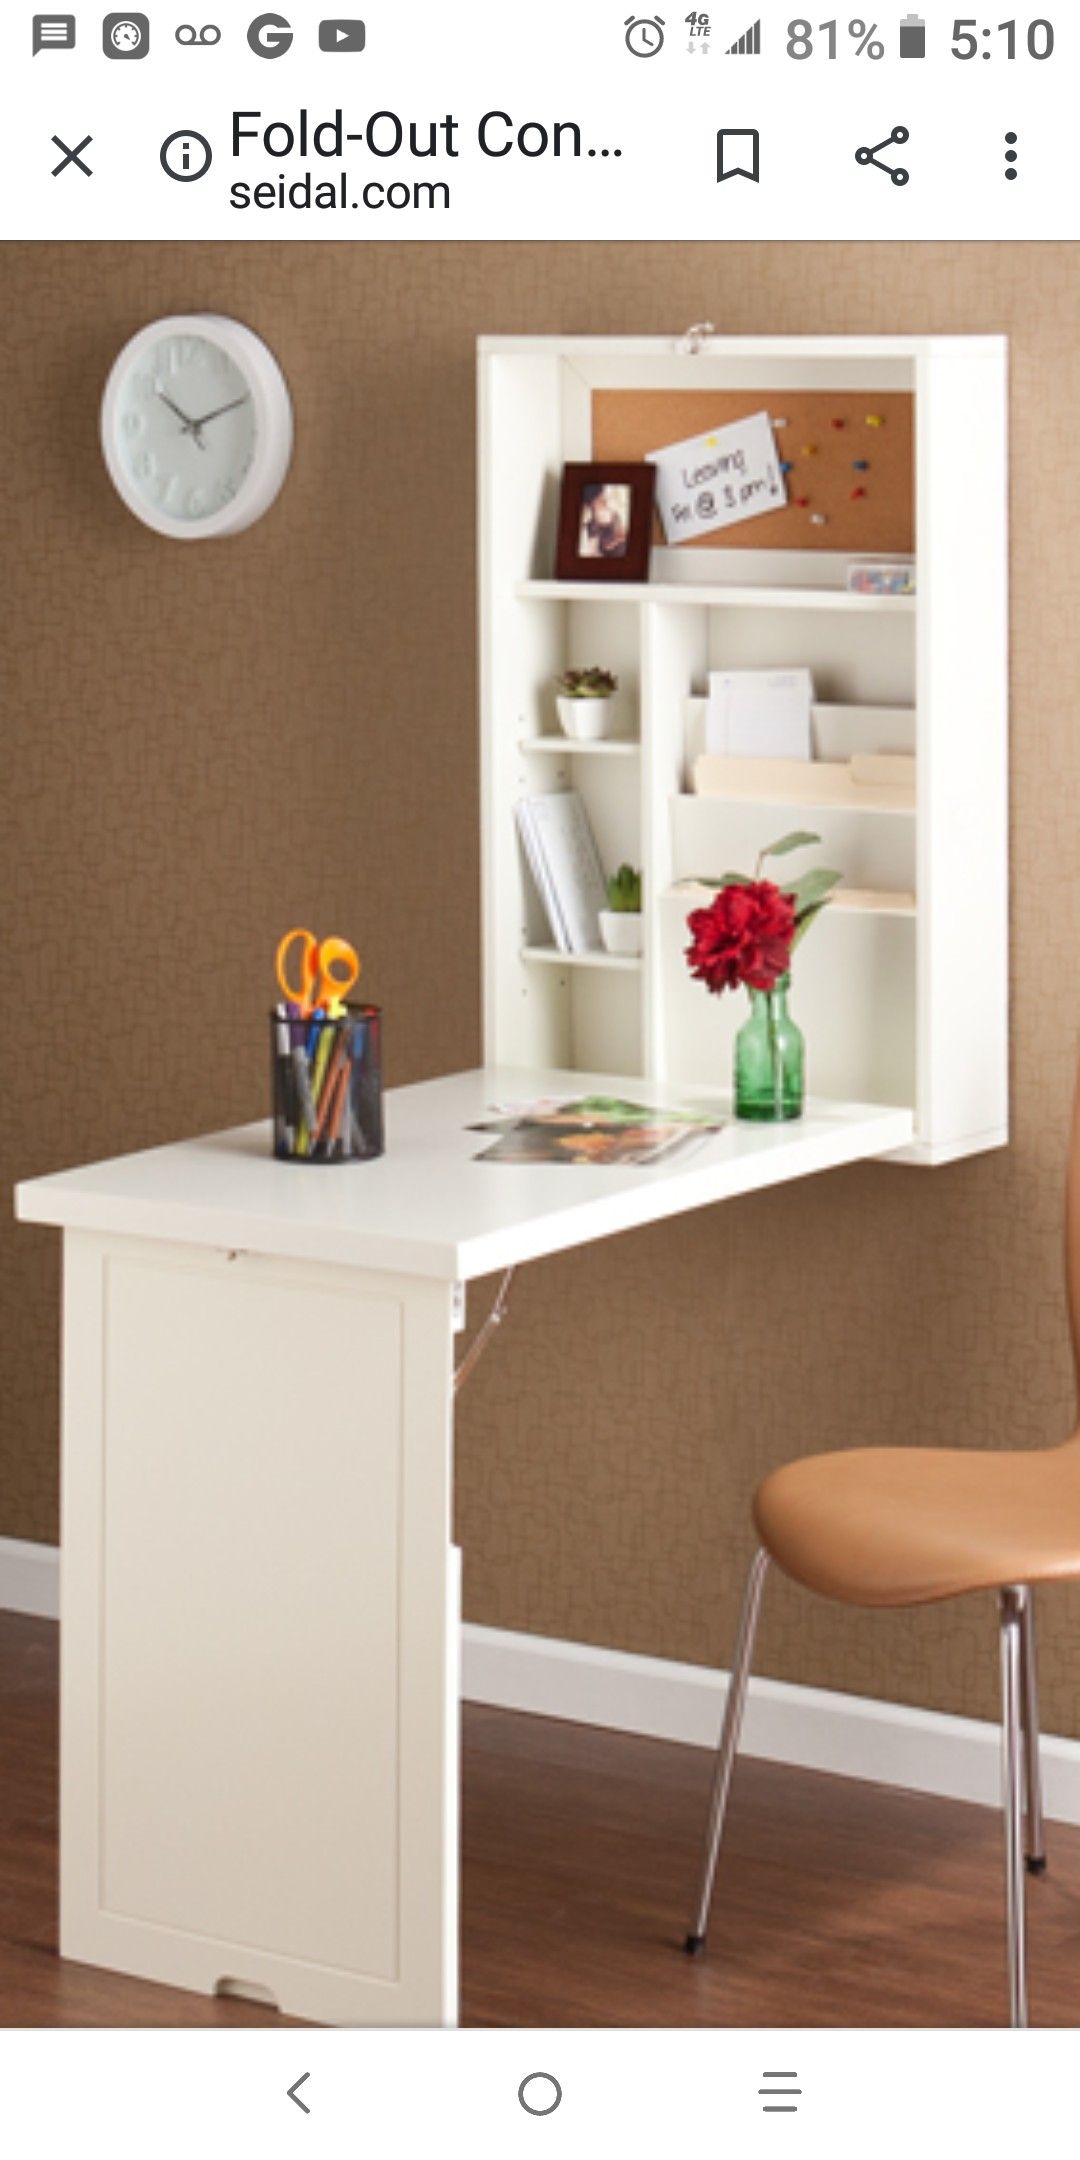 Fold out convertible desk. Winter white